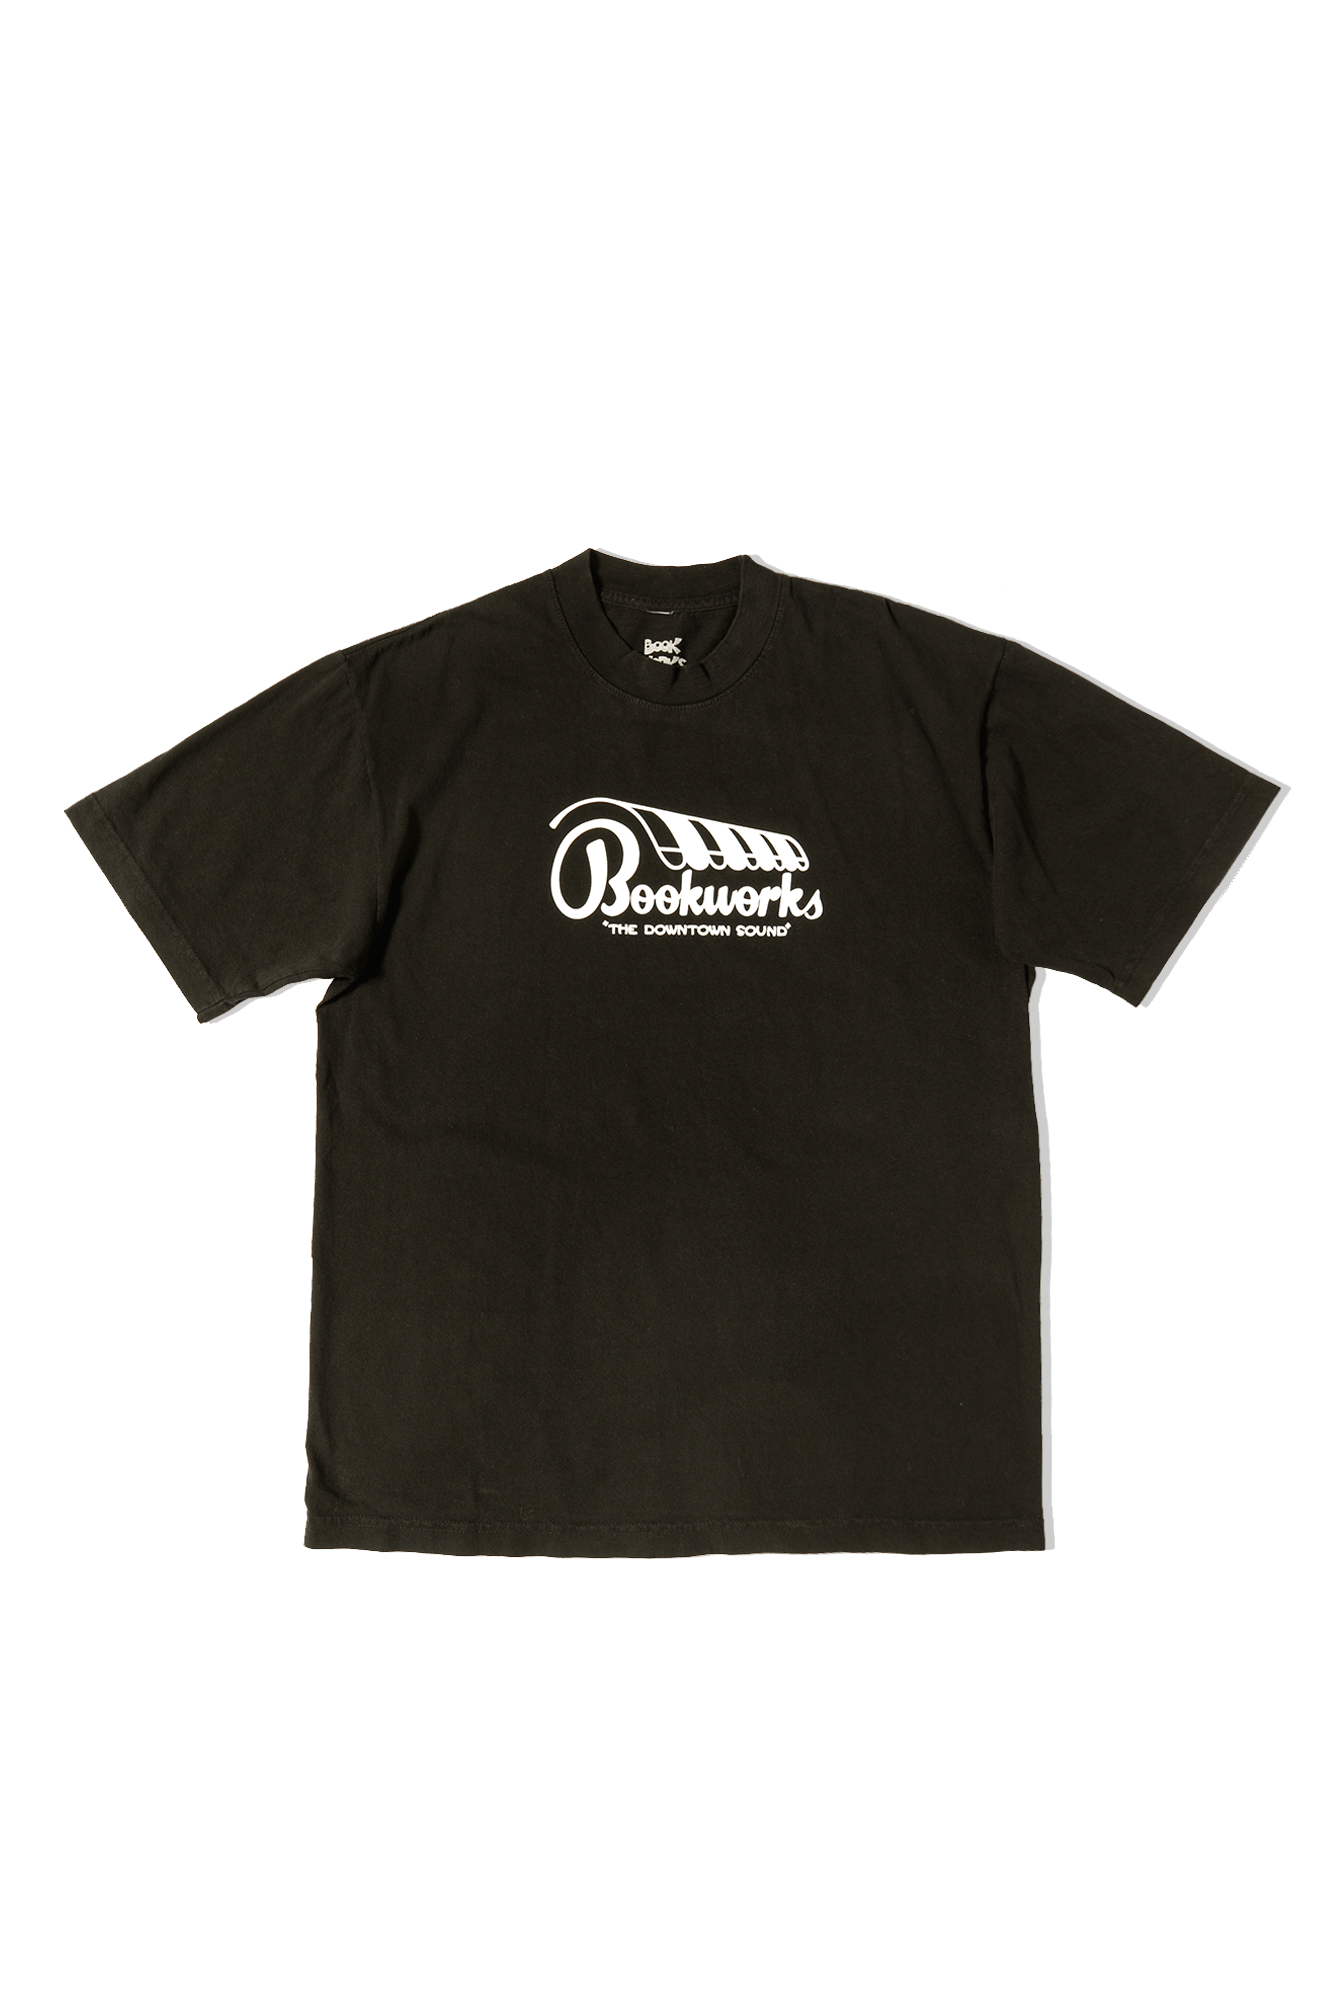 The Downtown Sound - T-Shirt